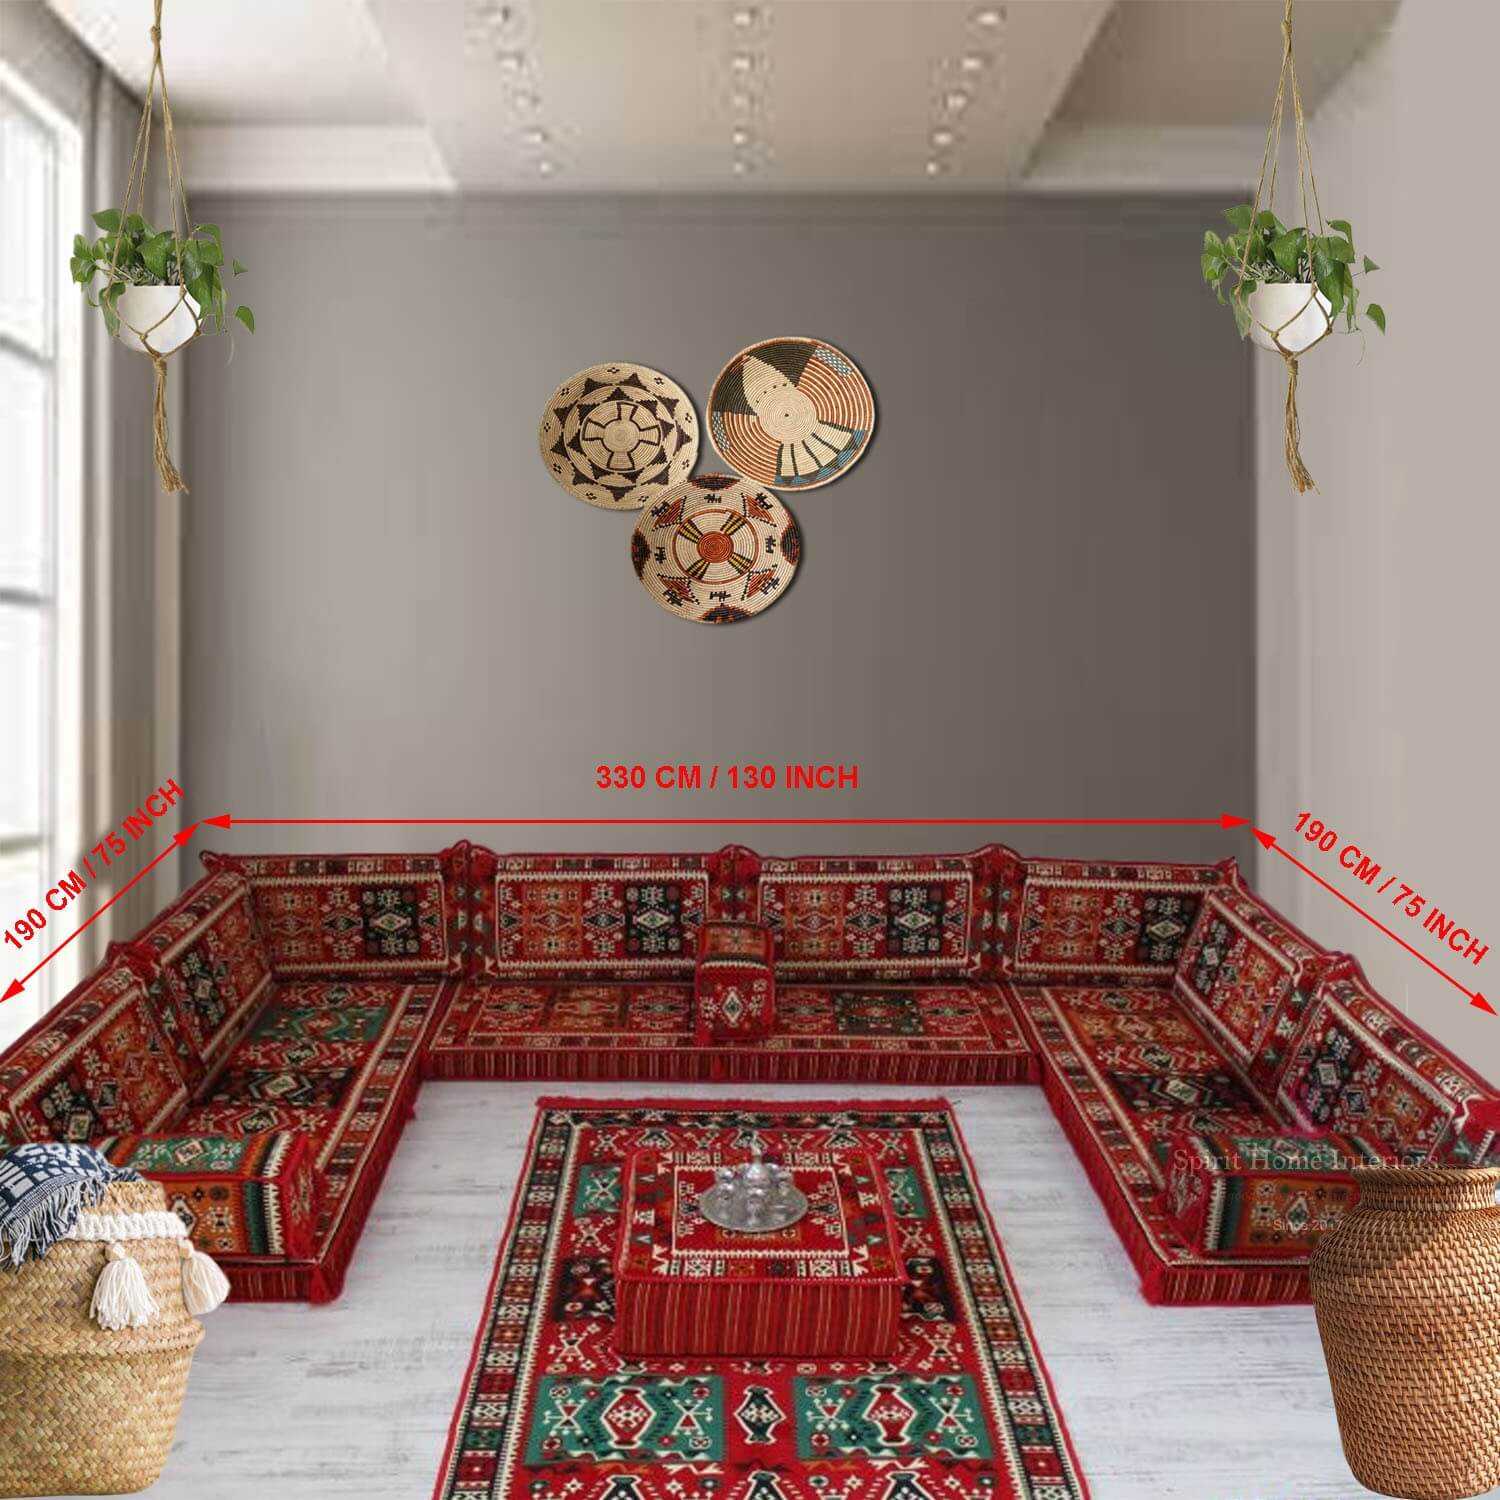 Spirit Home Interiors Red Floor sofa Large bohemian cushions Three seater couch Arabic style majlis seating 